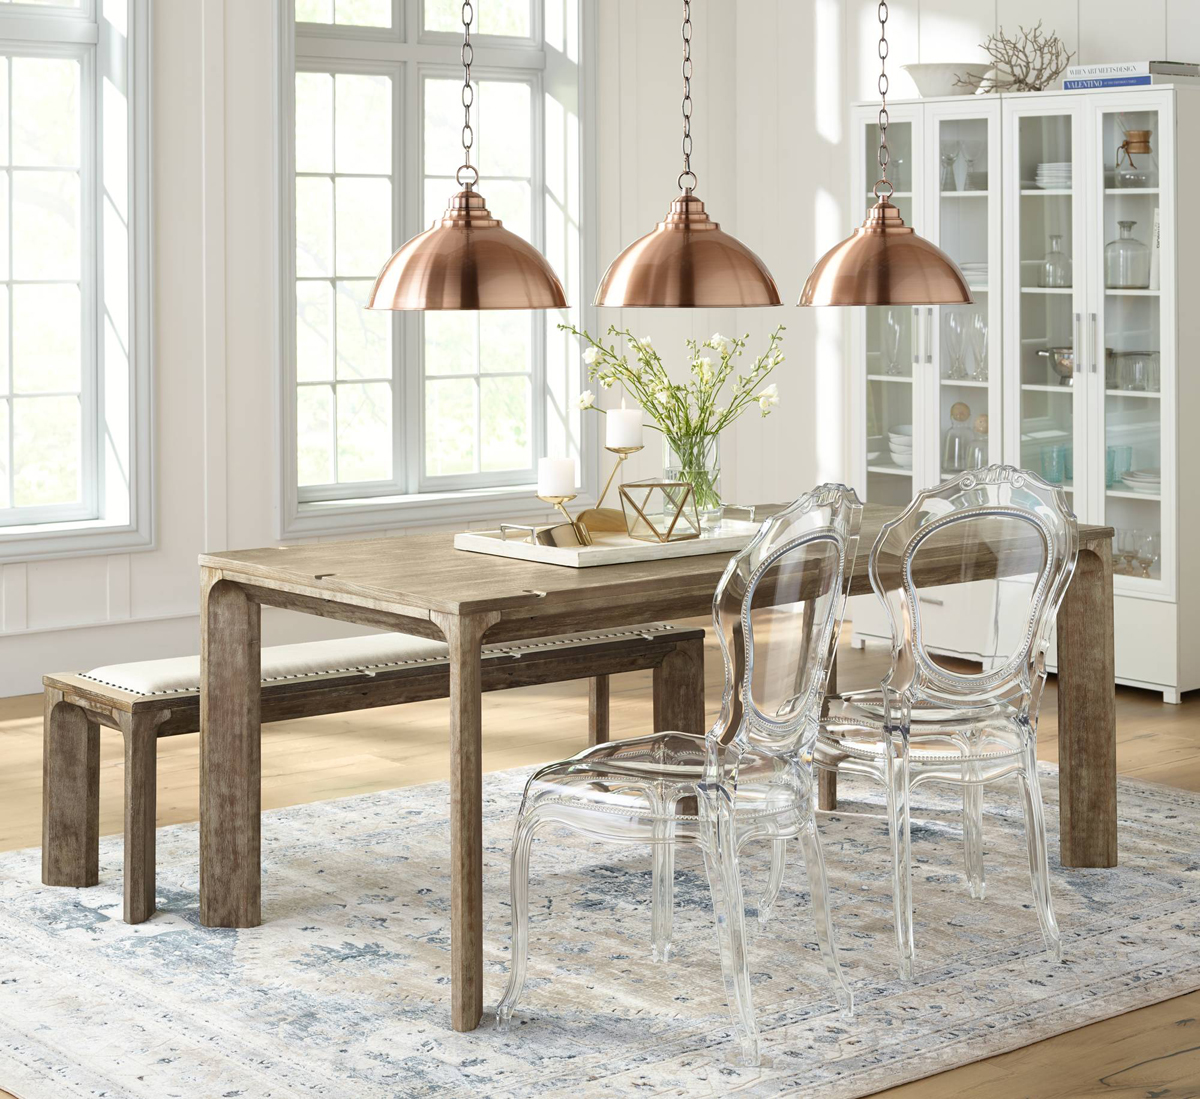 Dining Room With Copper Pendants